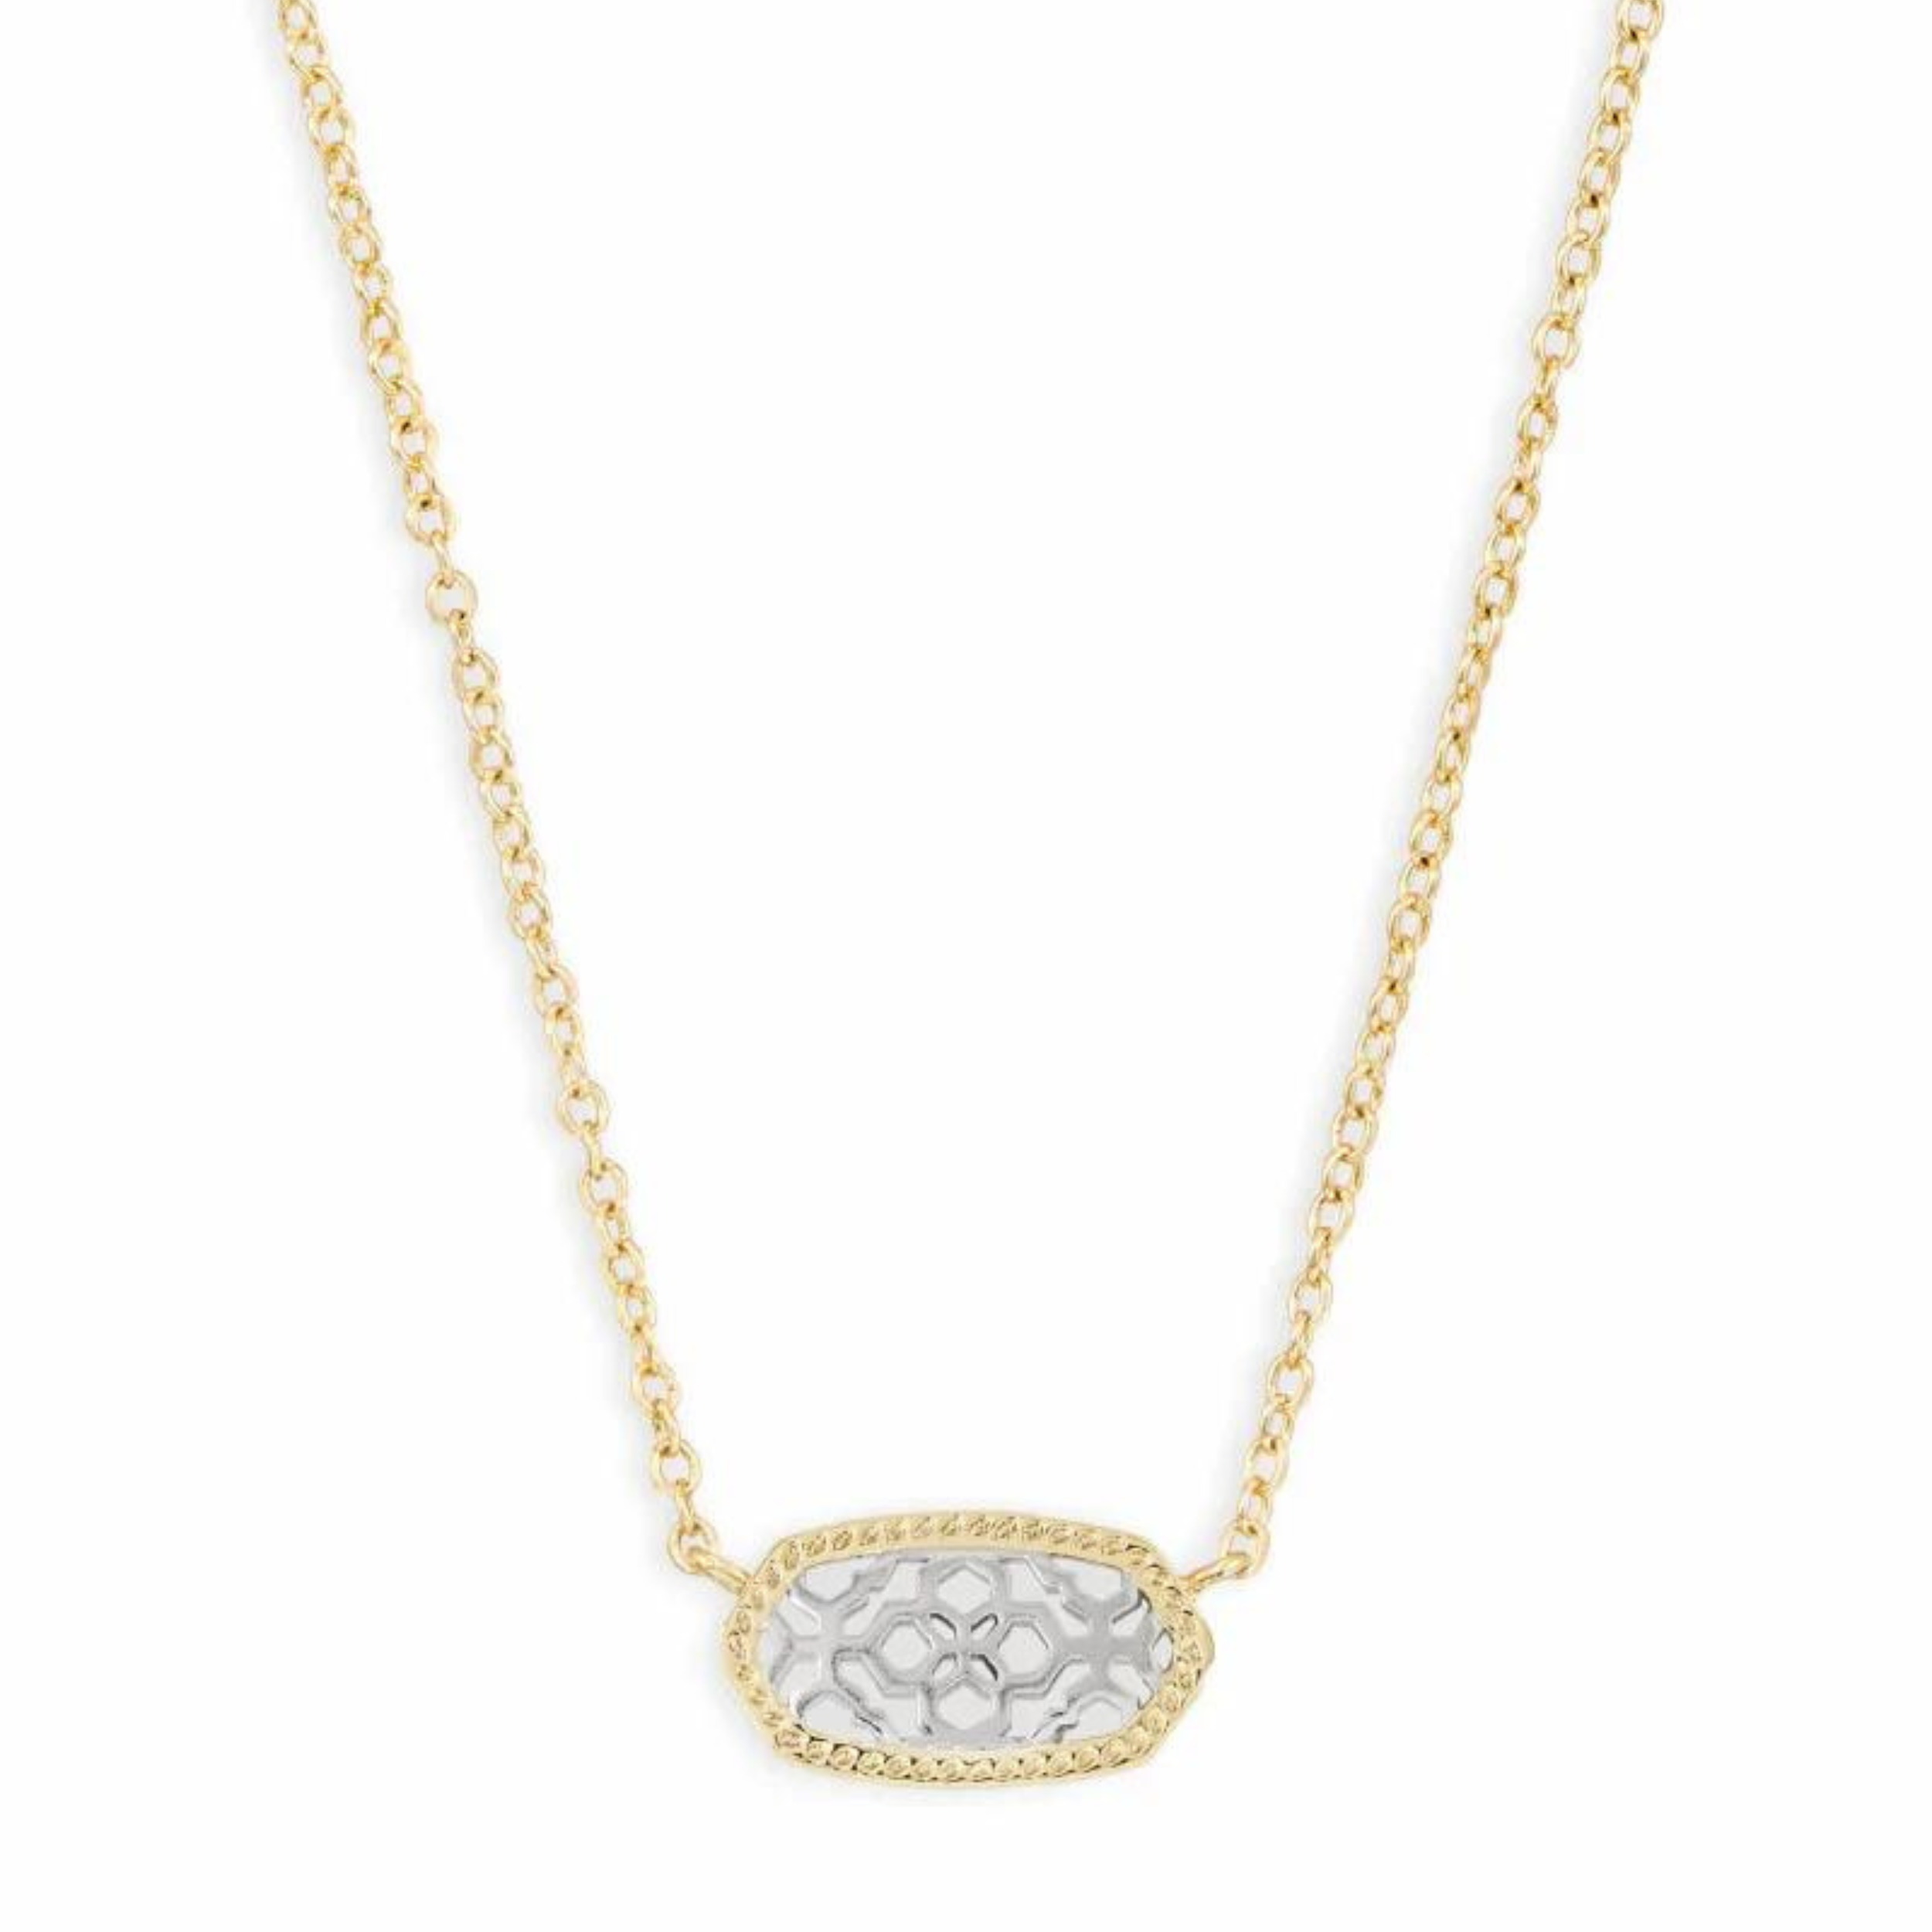 Gold pendant necklace with silver filigree, pictured on a white background.